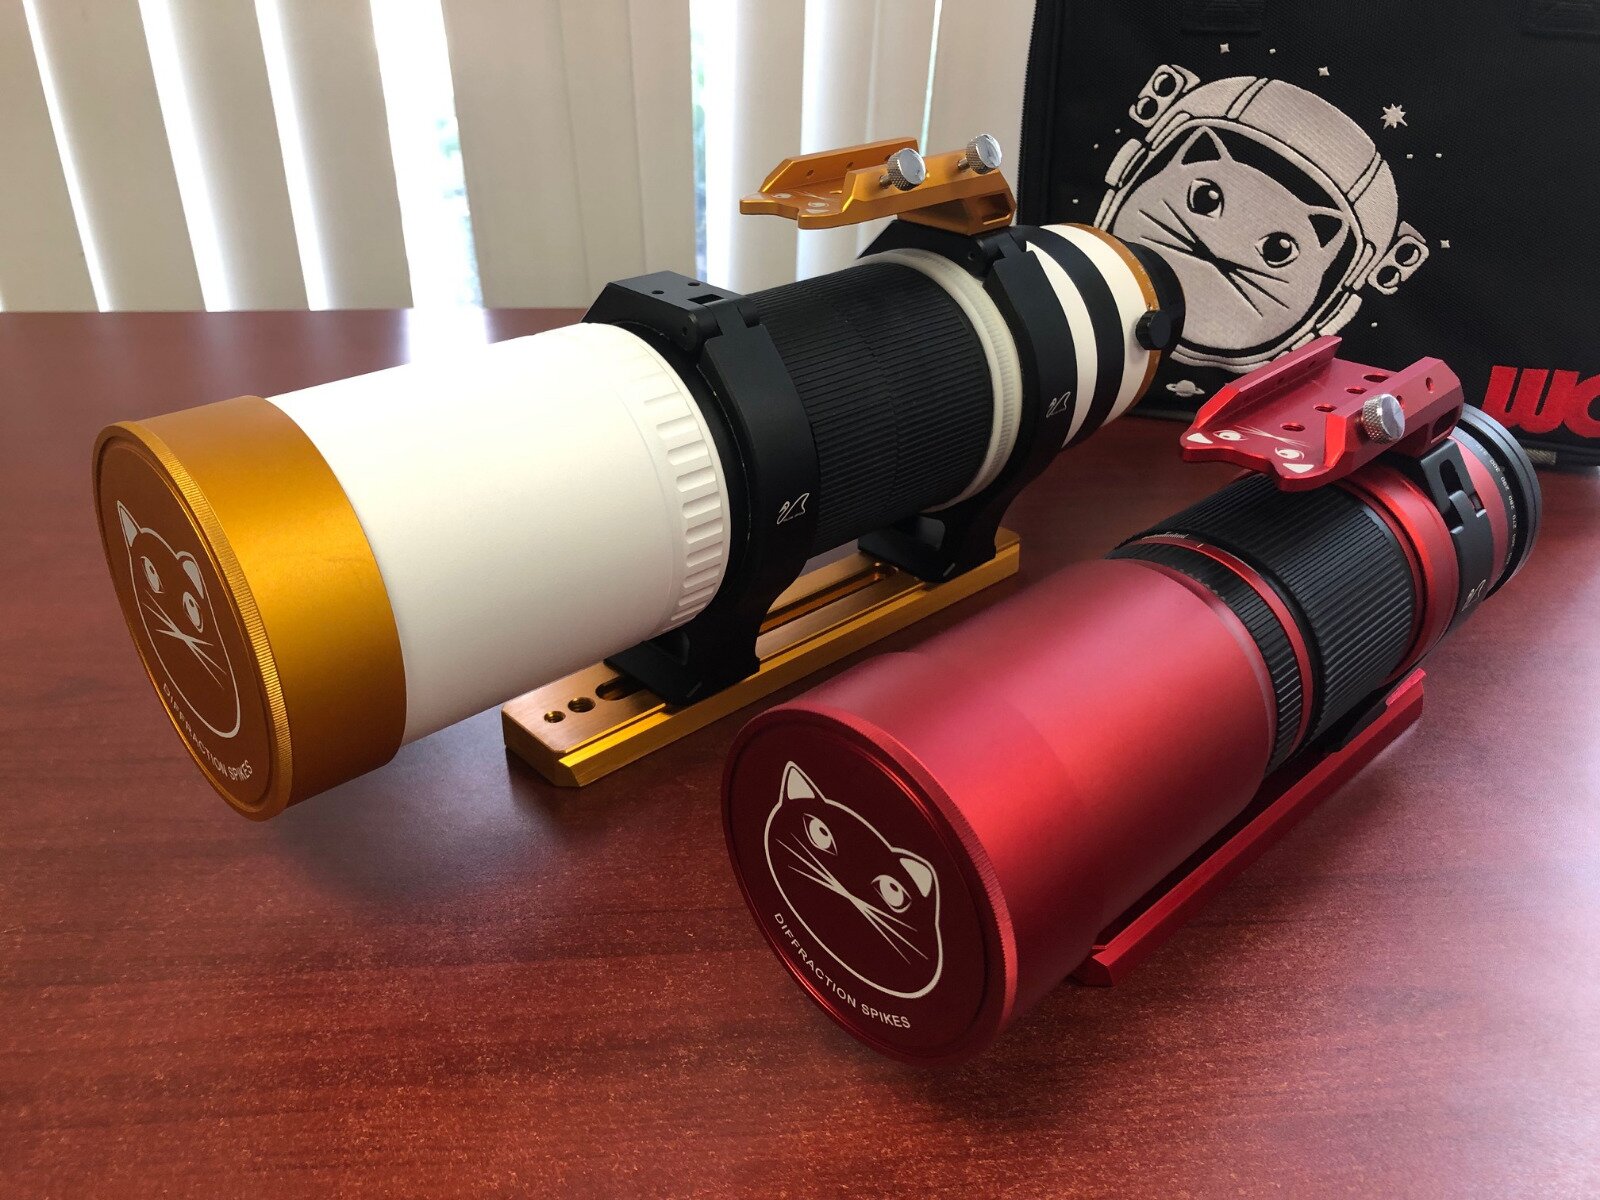 New Redcat 71 And Guidestar 61 Scopes From William Optics